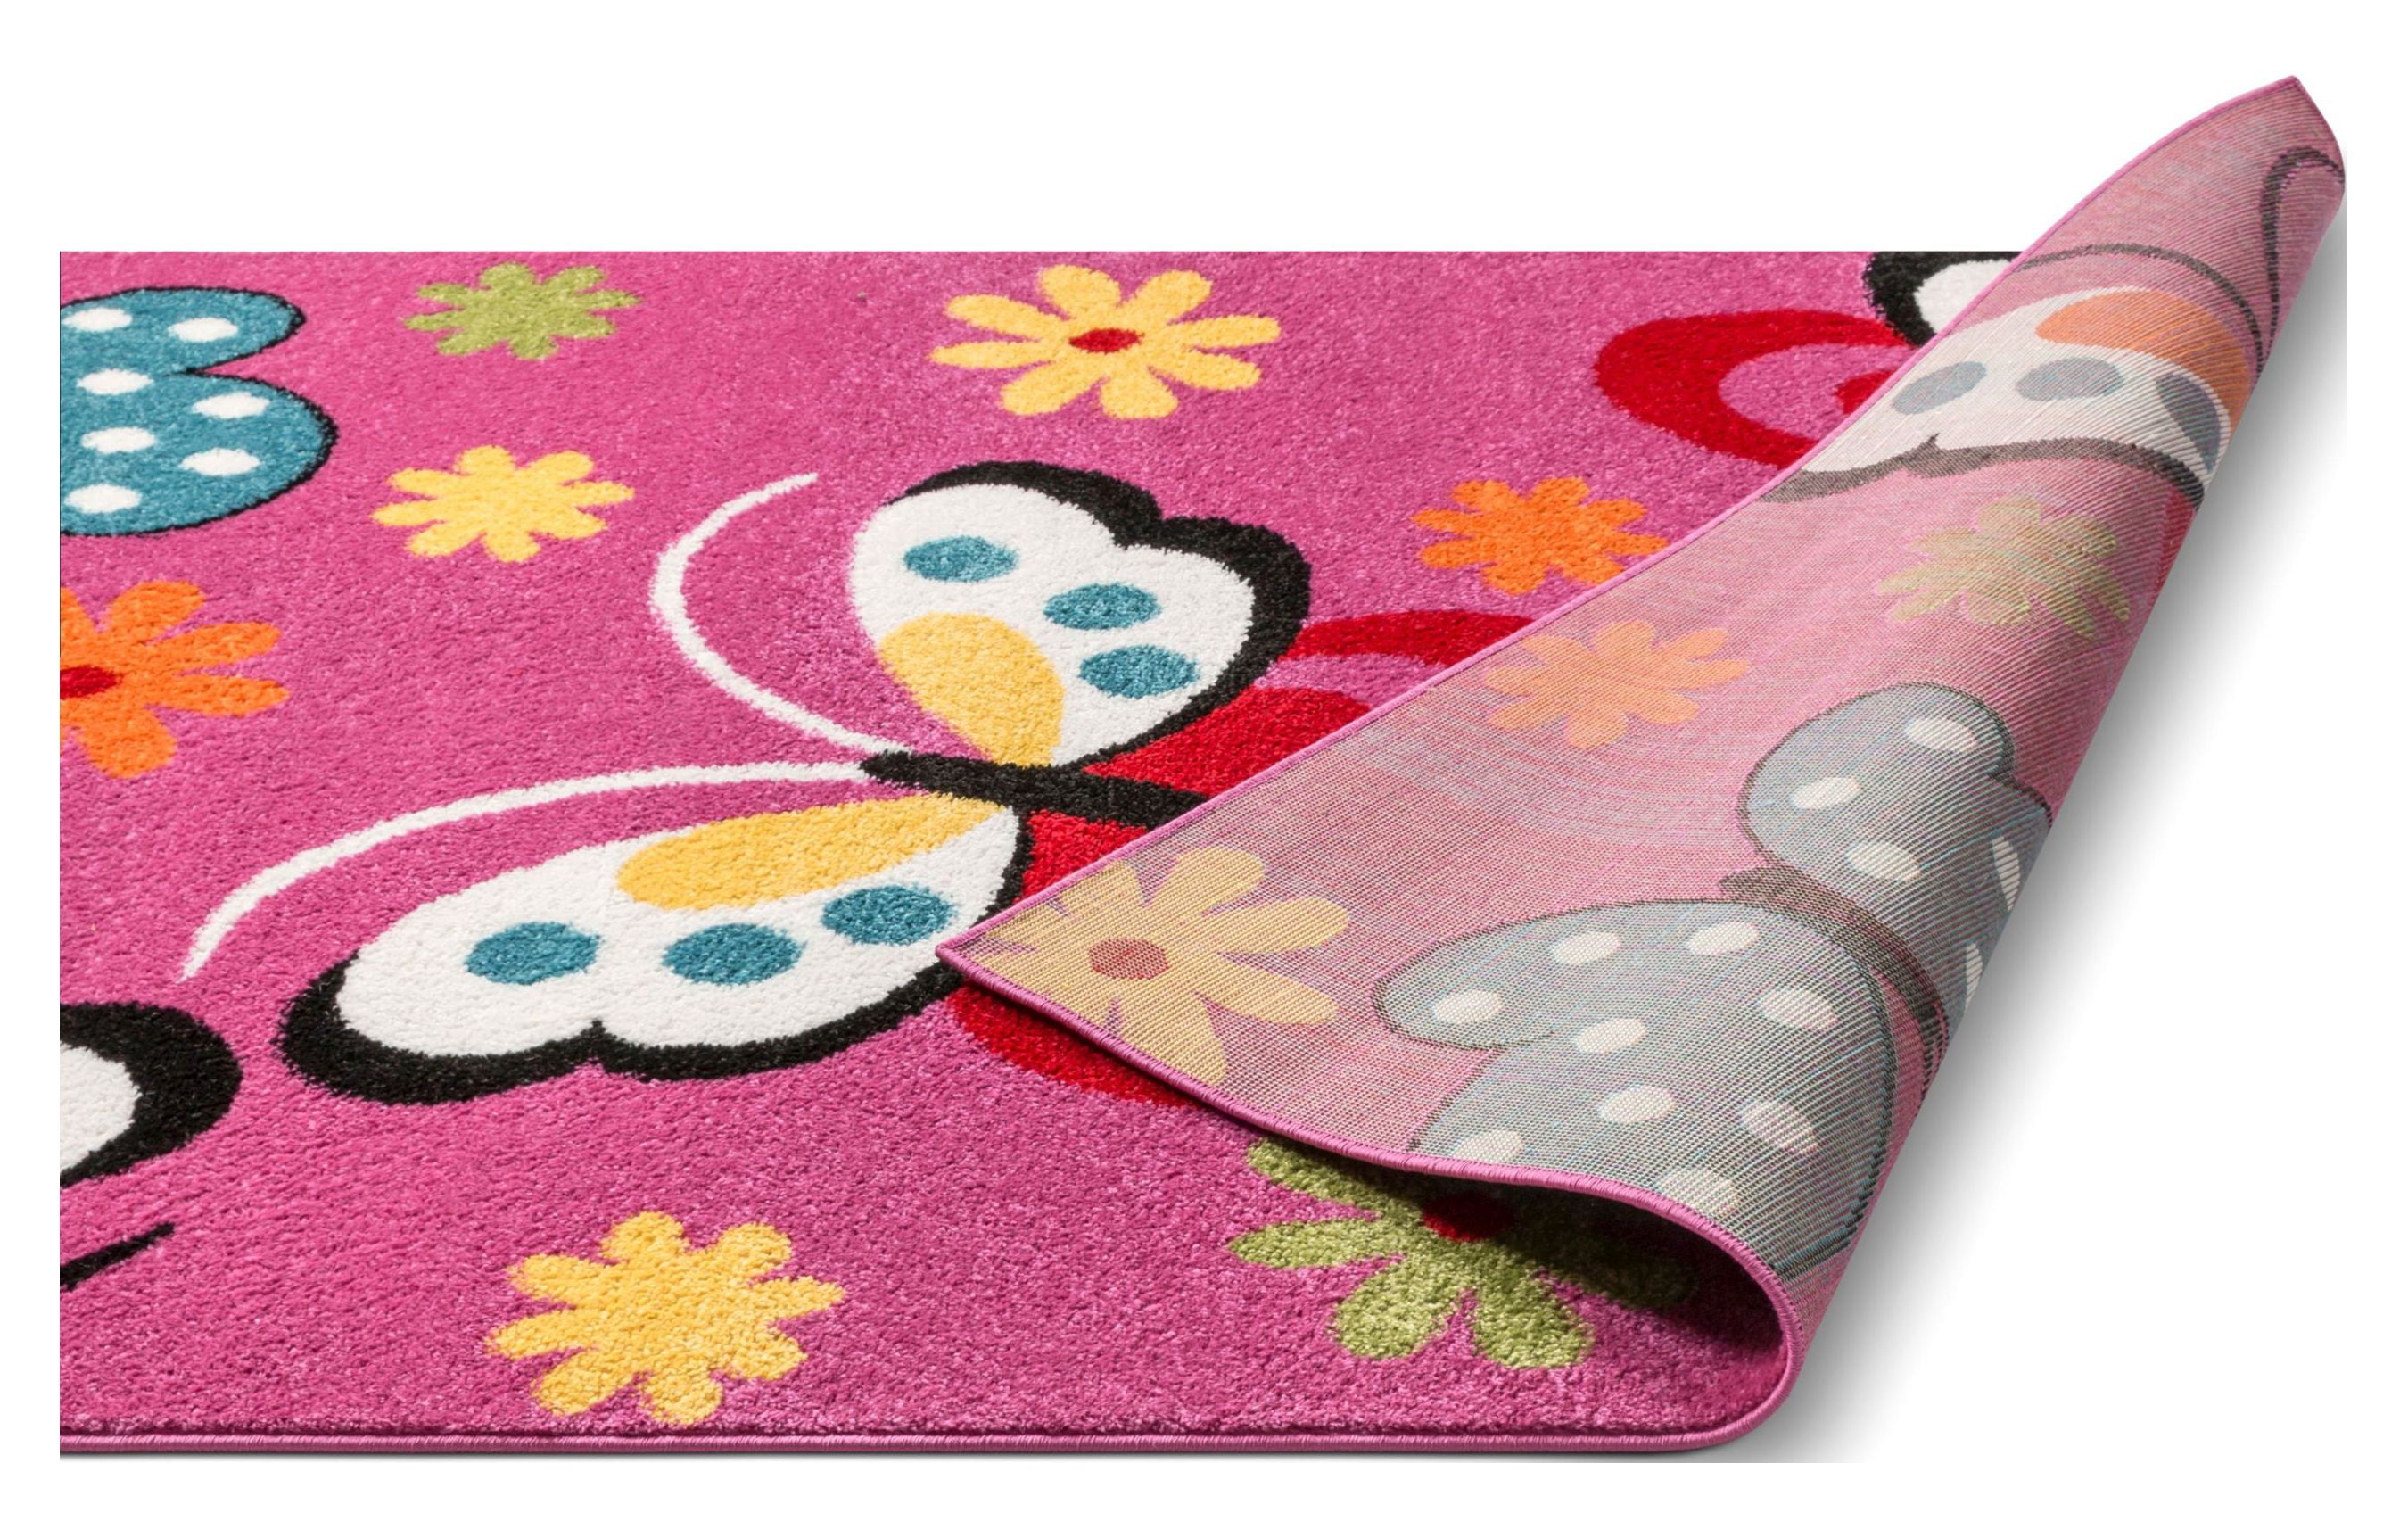 Well Woven Star Bright Daisy Butterflies Kids Area Rug - image 4 of 8